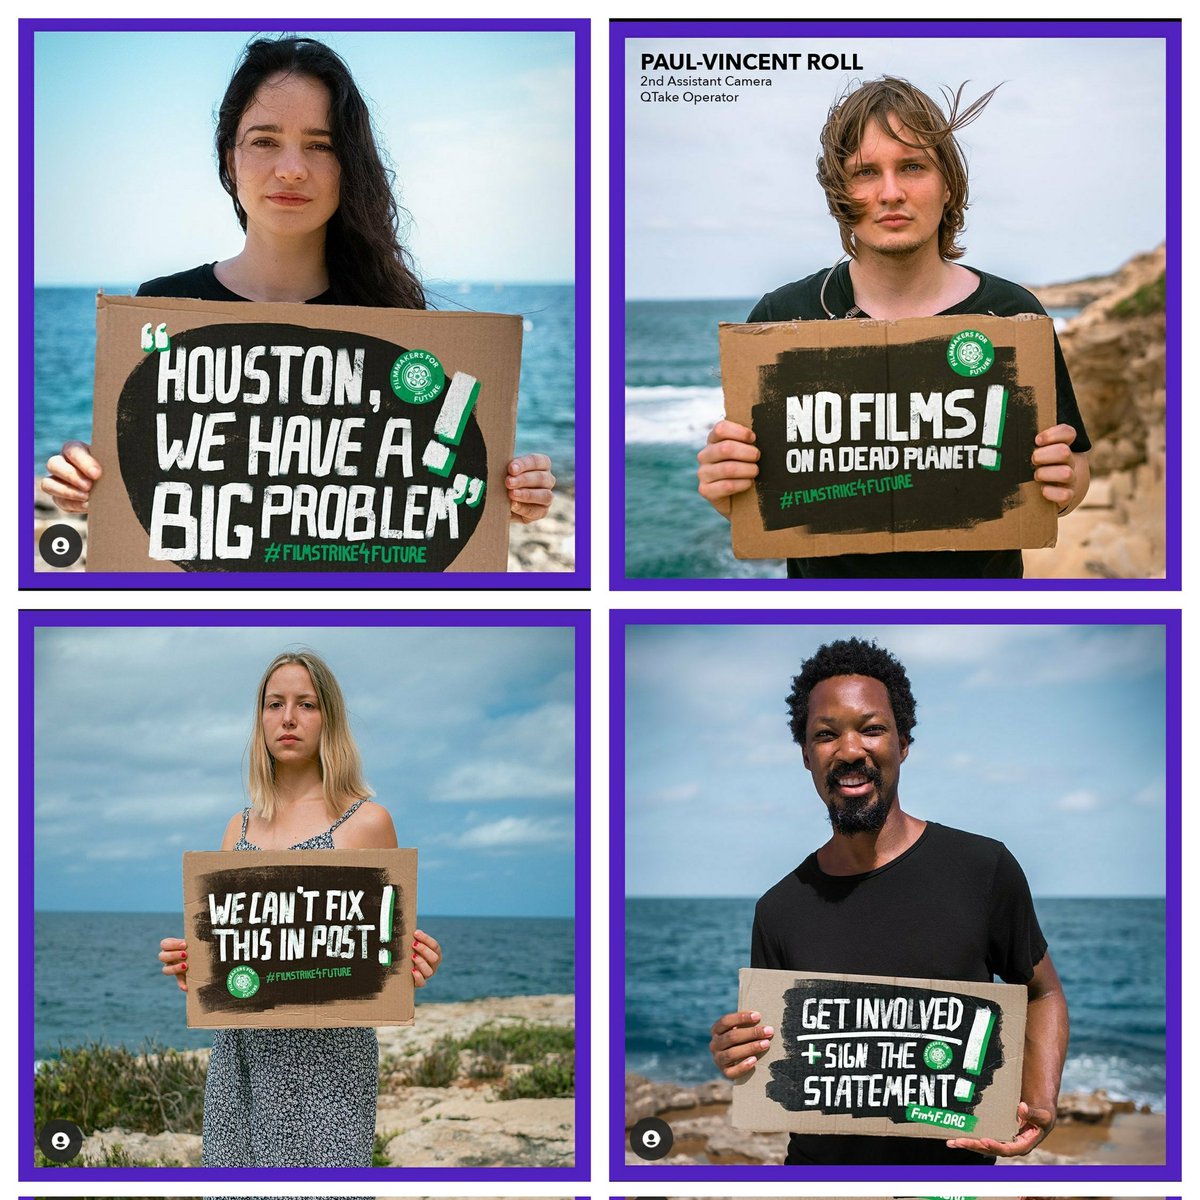 Filmmakers for Future continues to support the demands of @FridayforFuture and call on all #filmmaker|s to take part in the #GlobalClimateStrike! Get active now and tag your images with: #uprootthesystem #crew4climate #filmmakers4future #filmstrike4climate via @Filmmakers4F